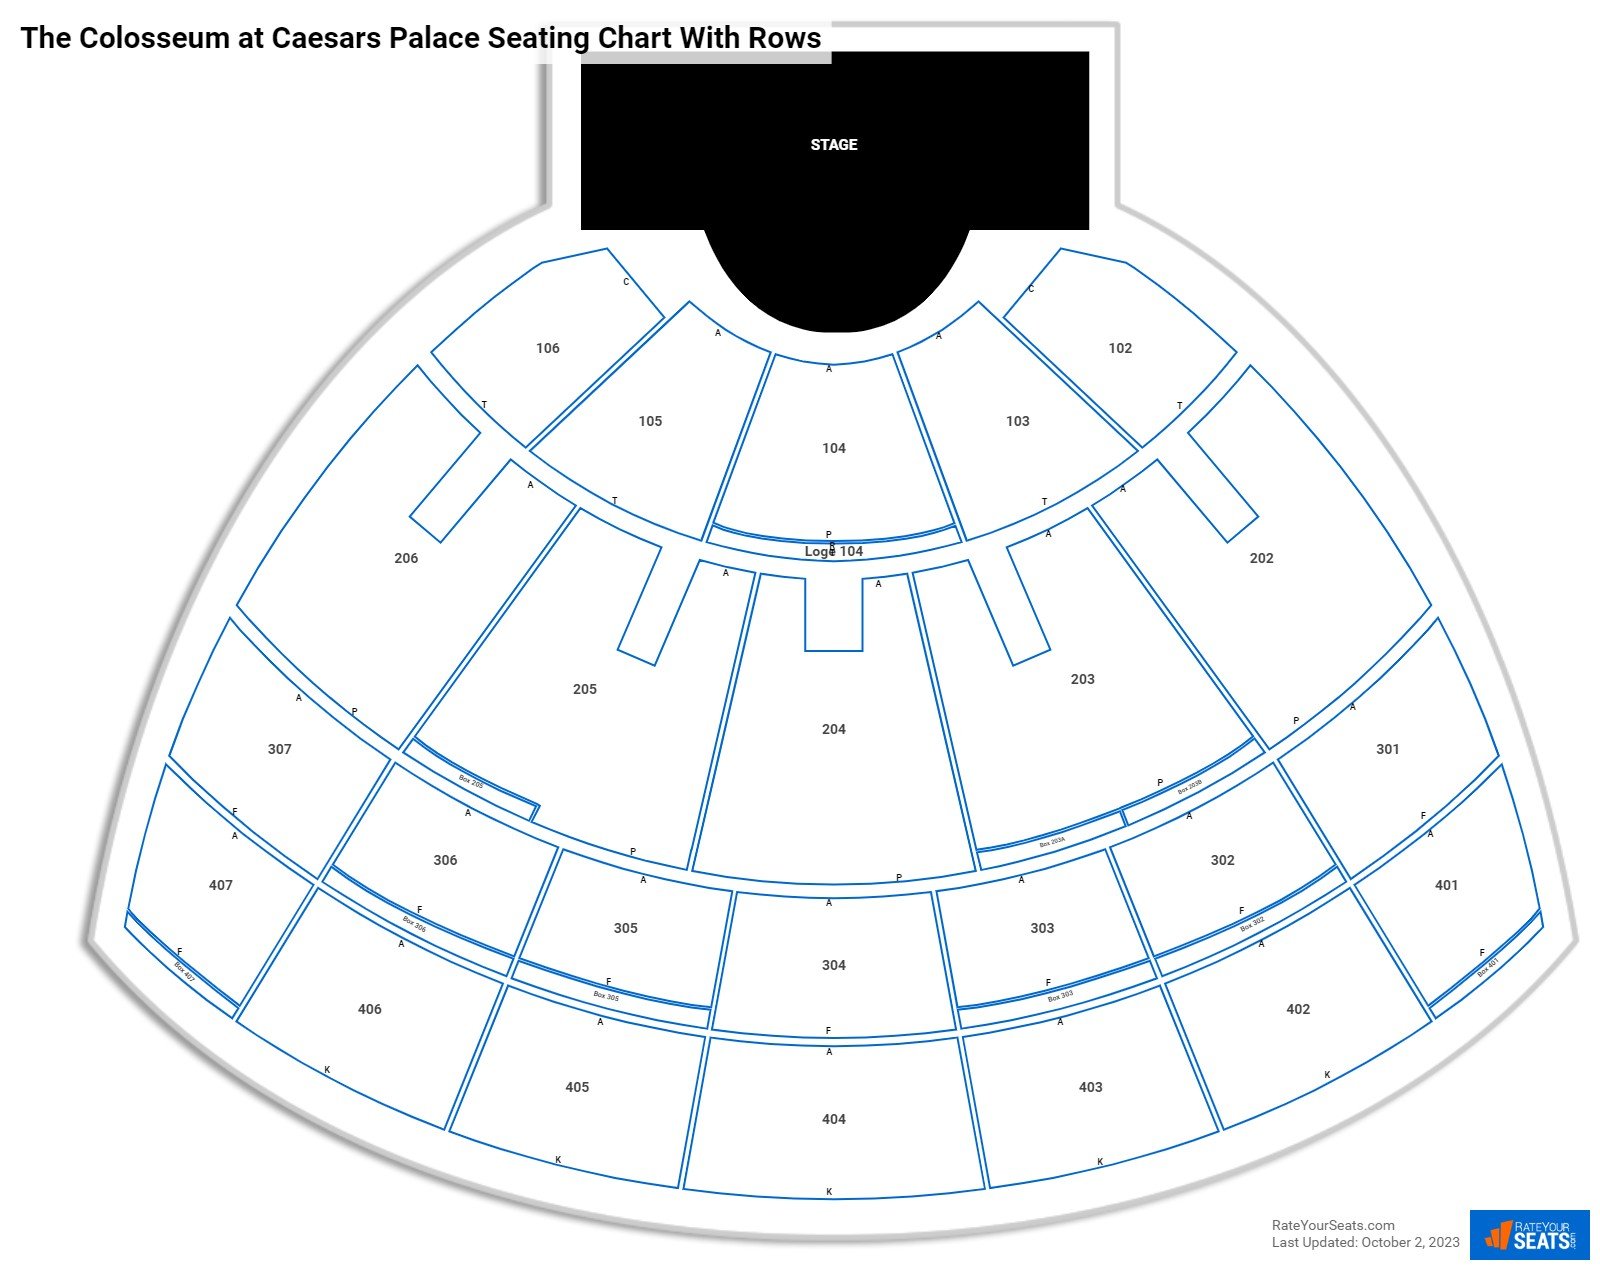 The Colosseum at Caesars Palace seating chart with row numbers